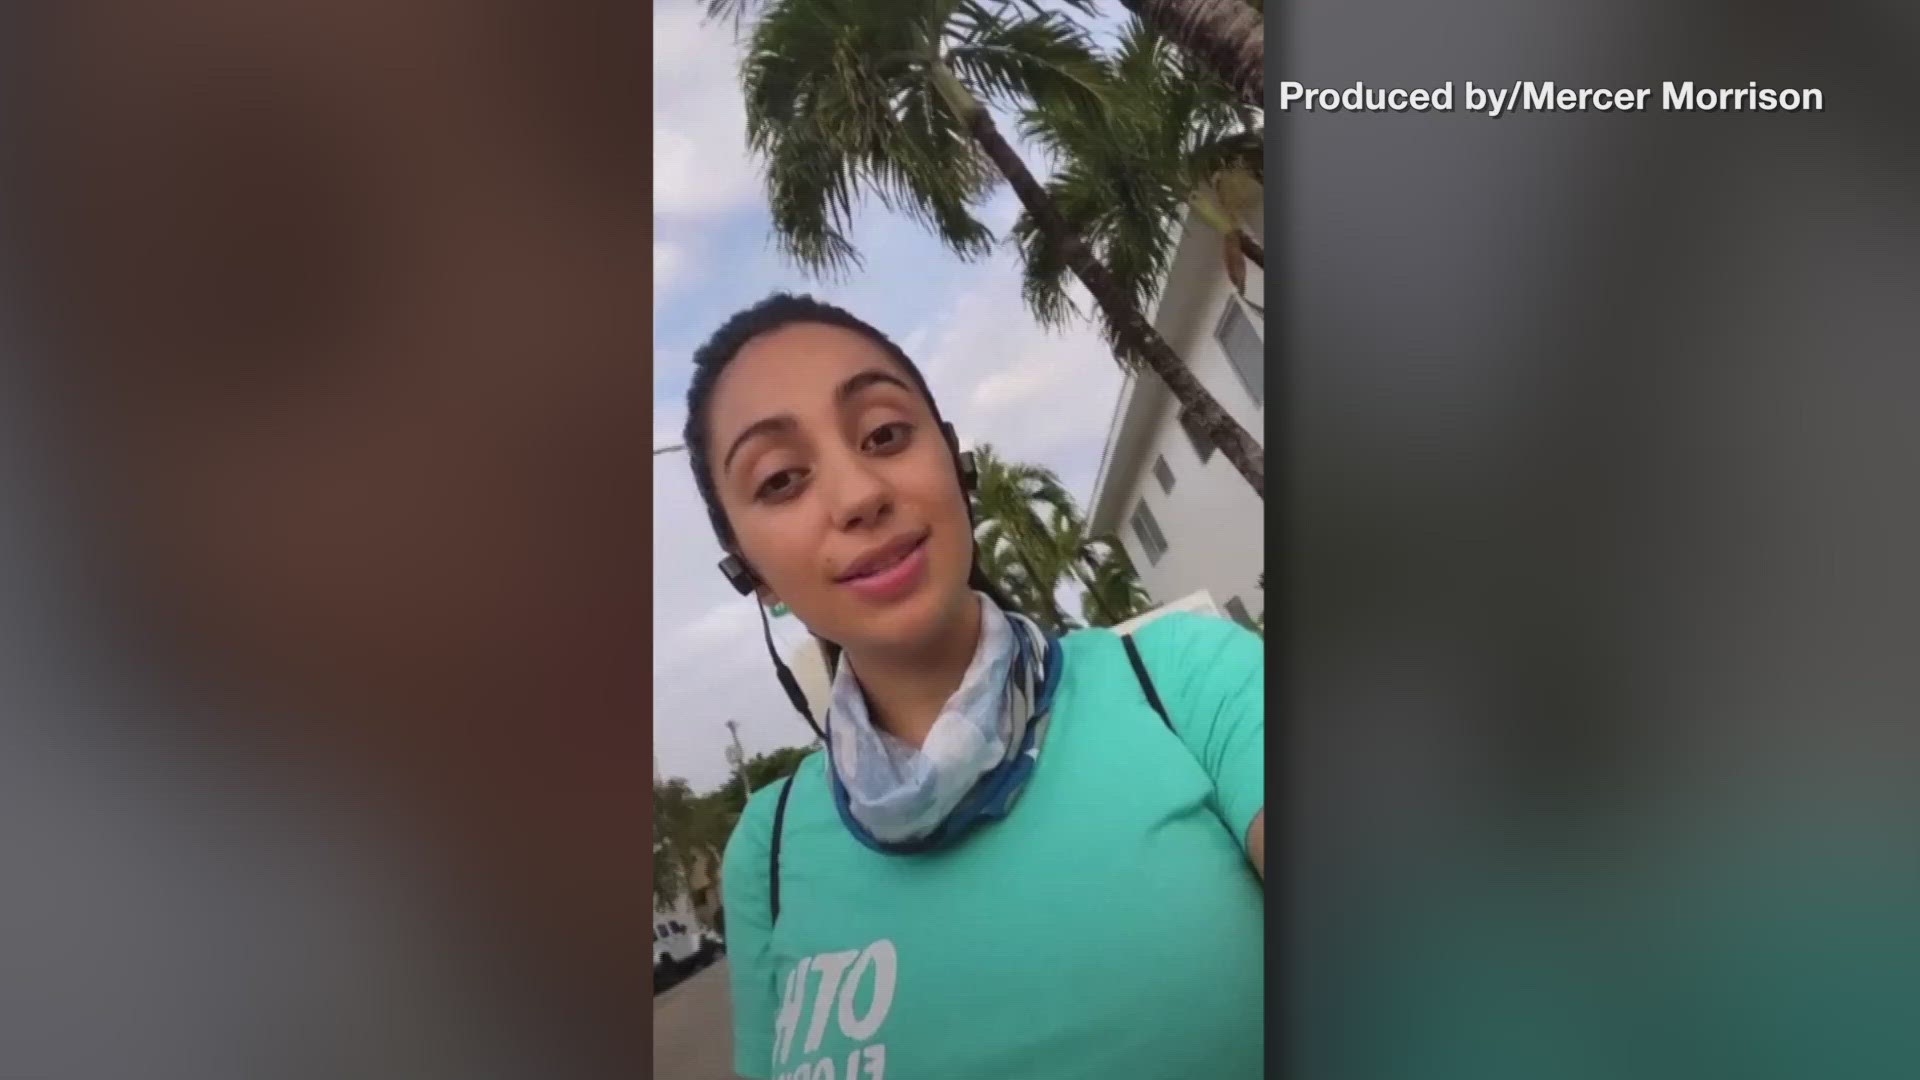 Maria Algarra is out on the beaches of Miami along with others to clean up masks and gloves used as PPE that weren't properly disposed of. Veuer's Mercer Morrison has the story.